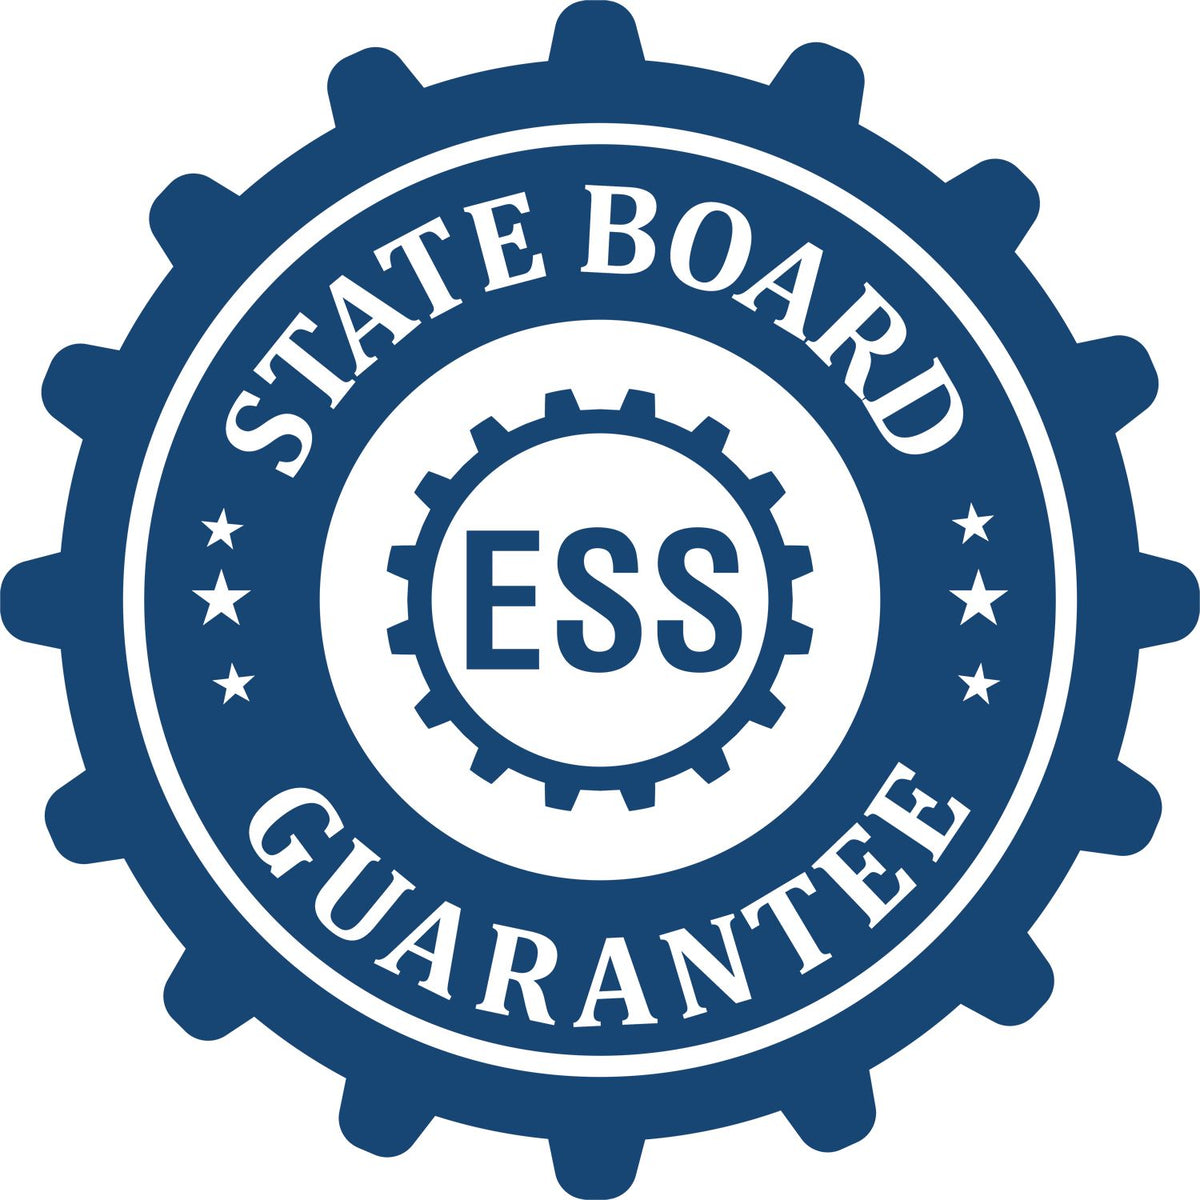 An emblem in a gear shape illustrating a state board guarantee for the Gift New Jersey Landscape Architect Seal